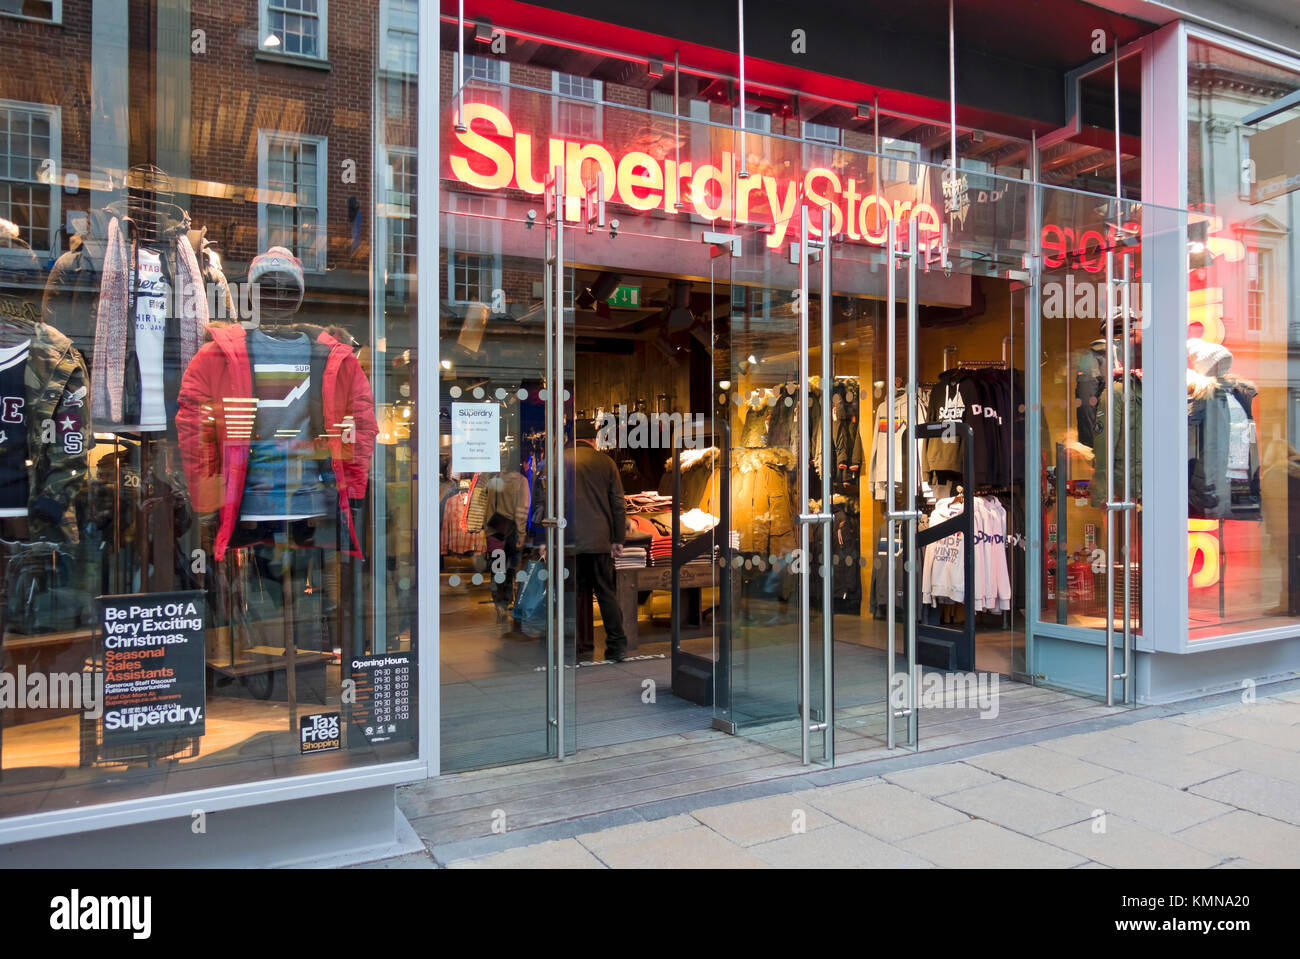 Superdry Shops High Resolution Stock Photography and Images - Alamy